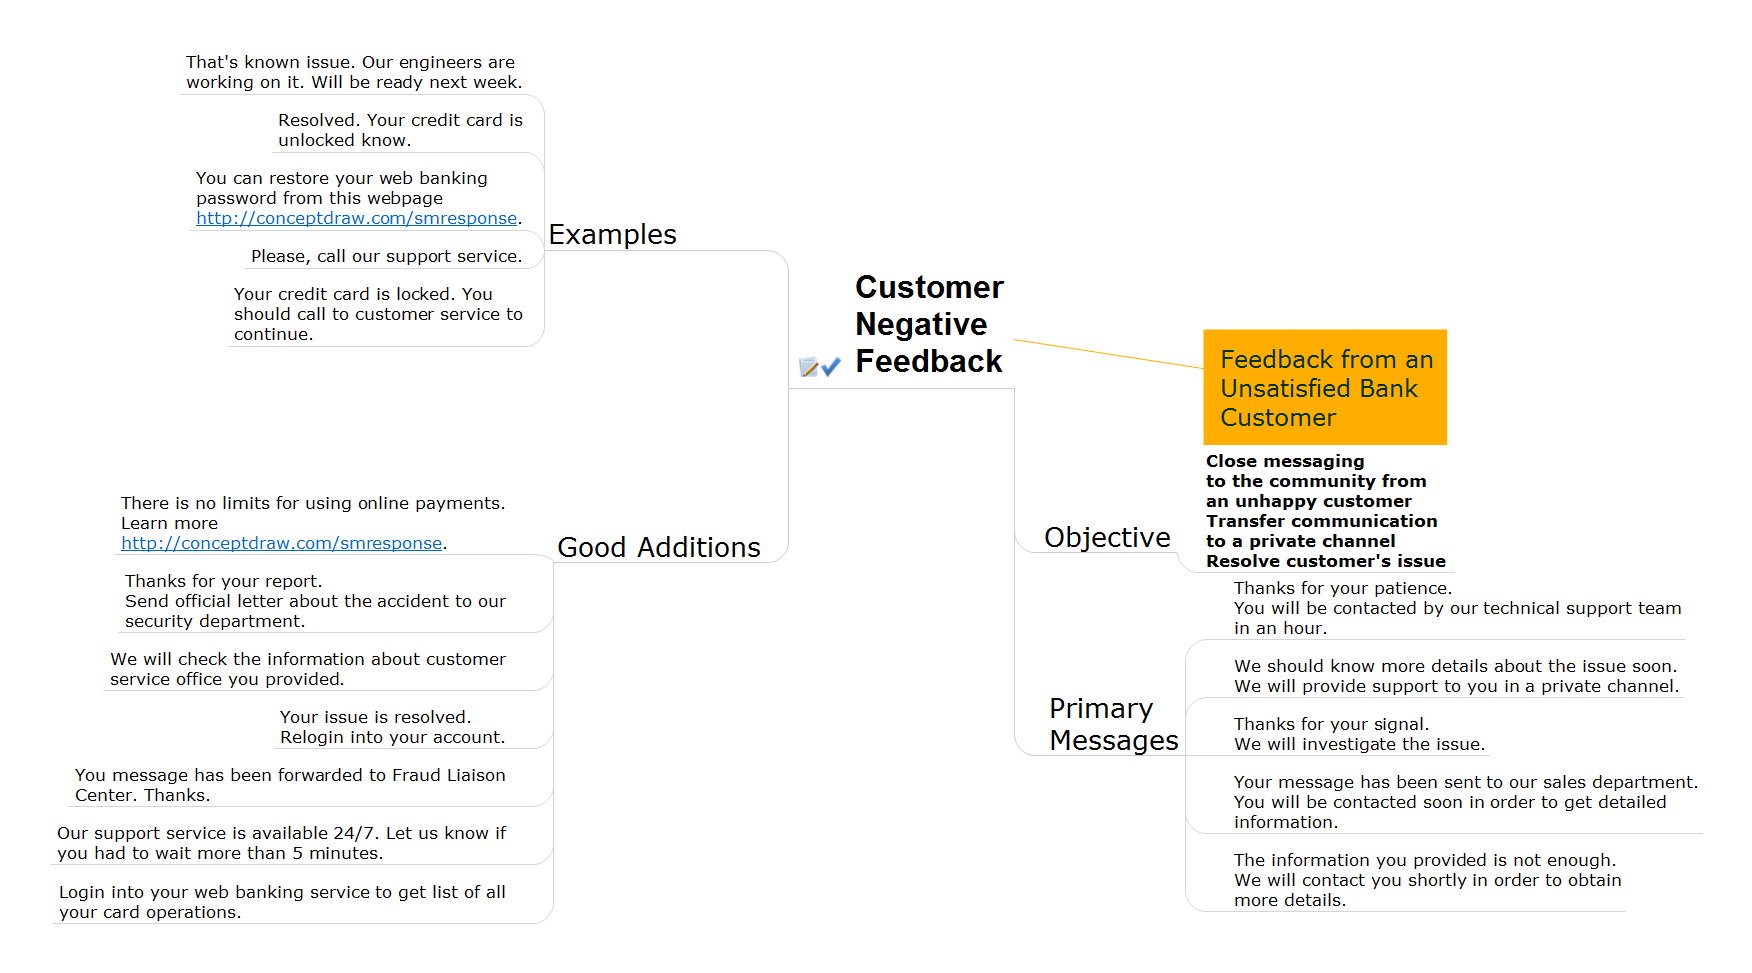 Action mind map - Bank customer notifications